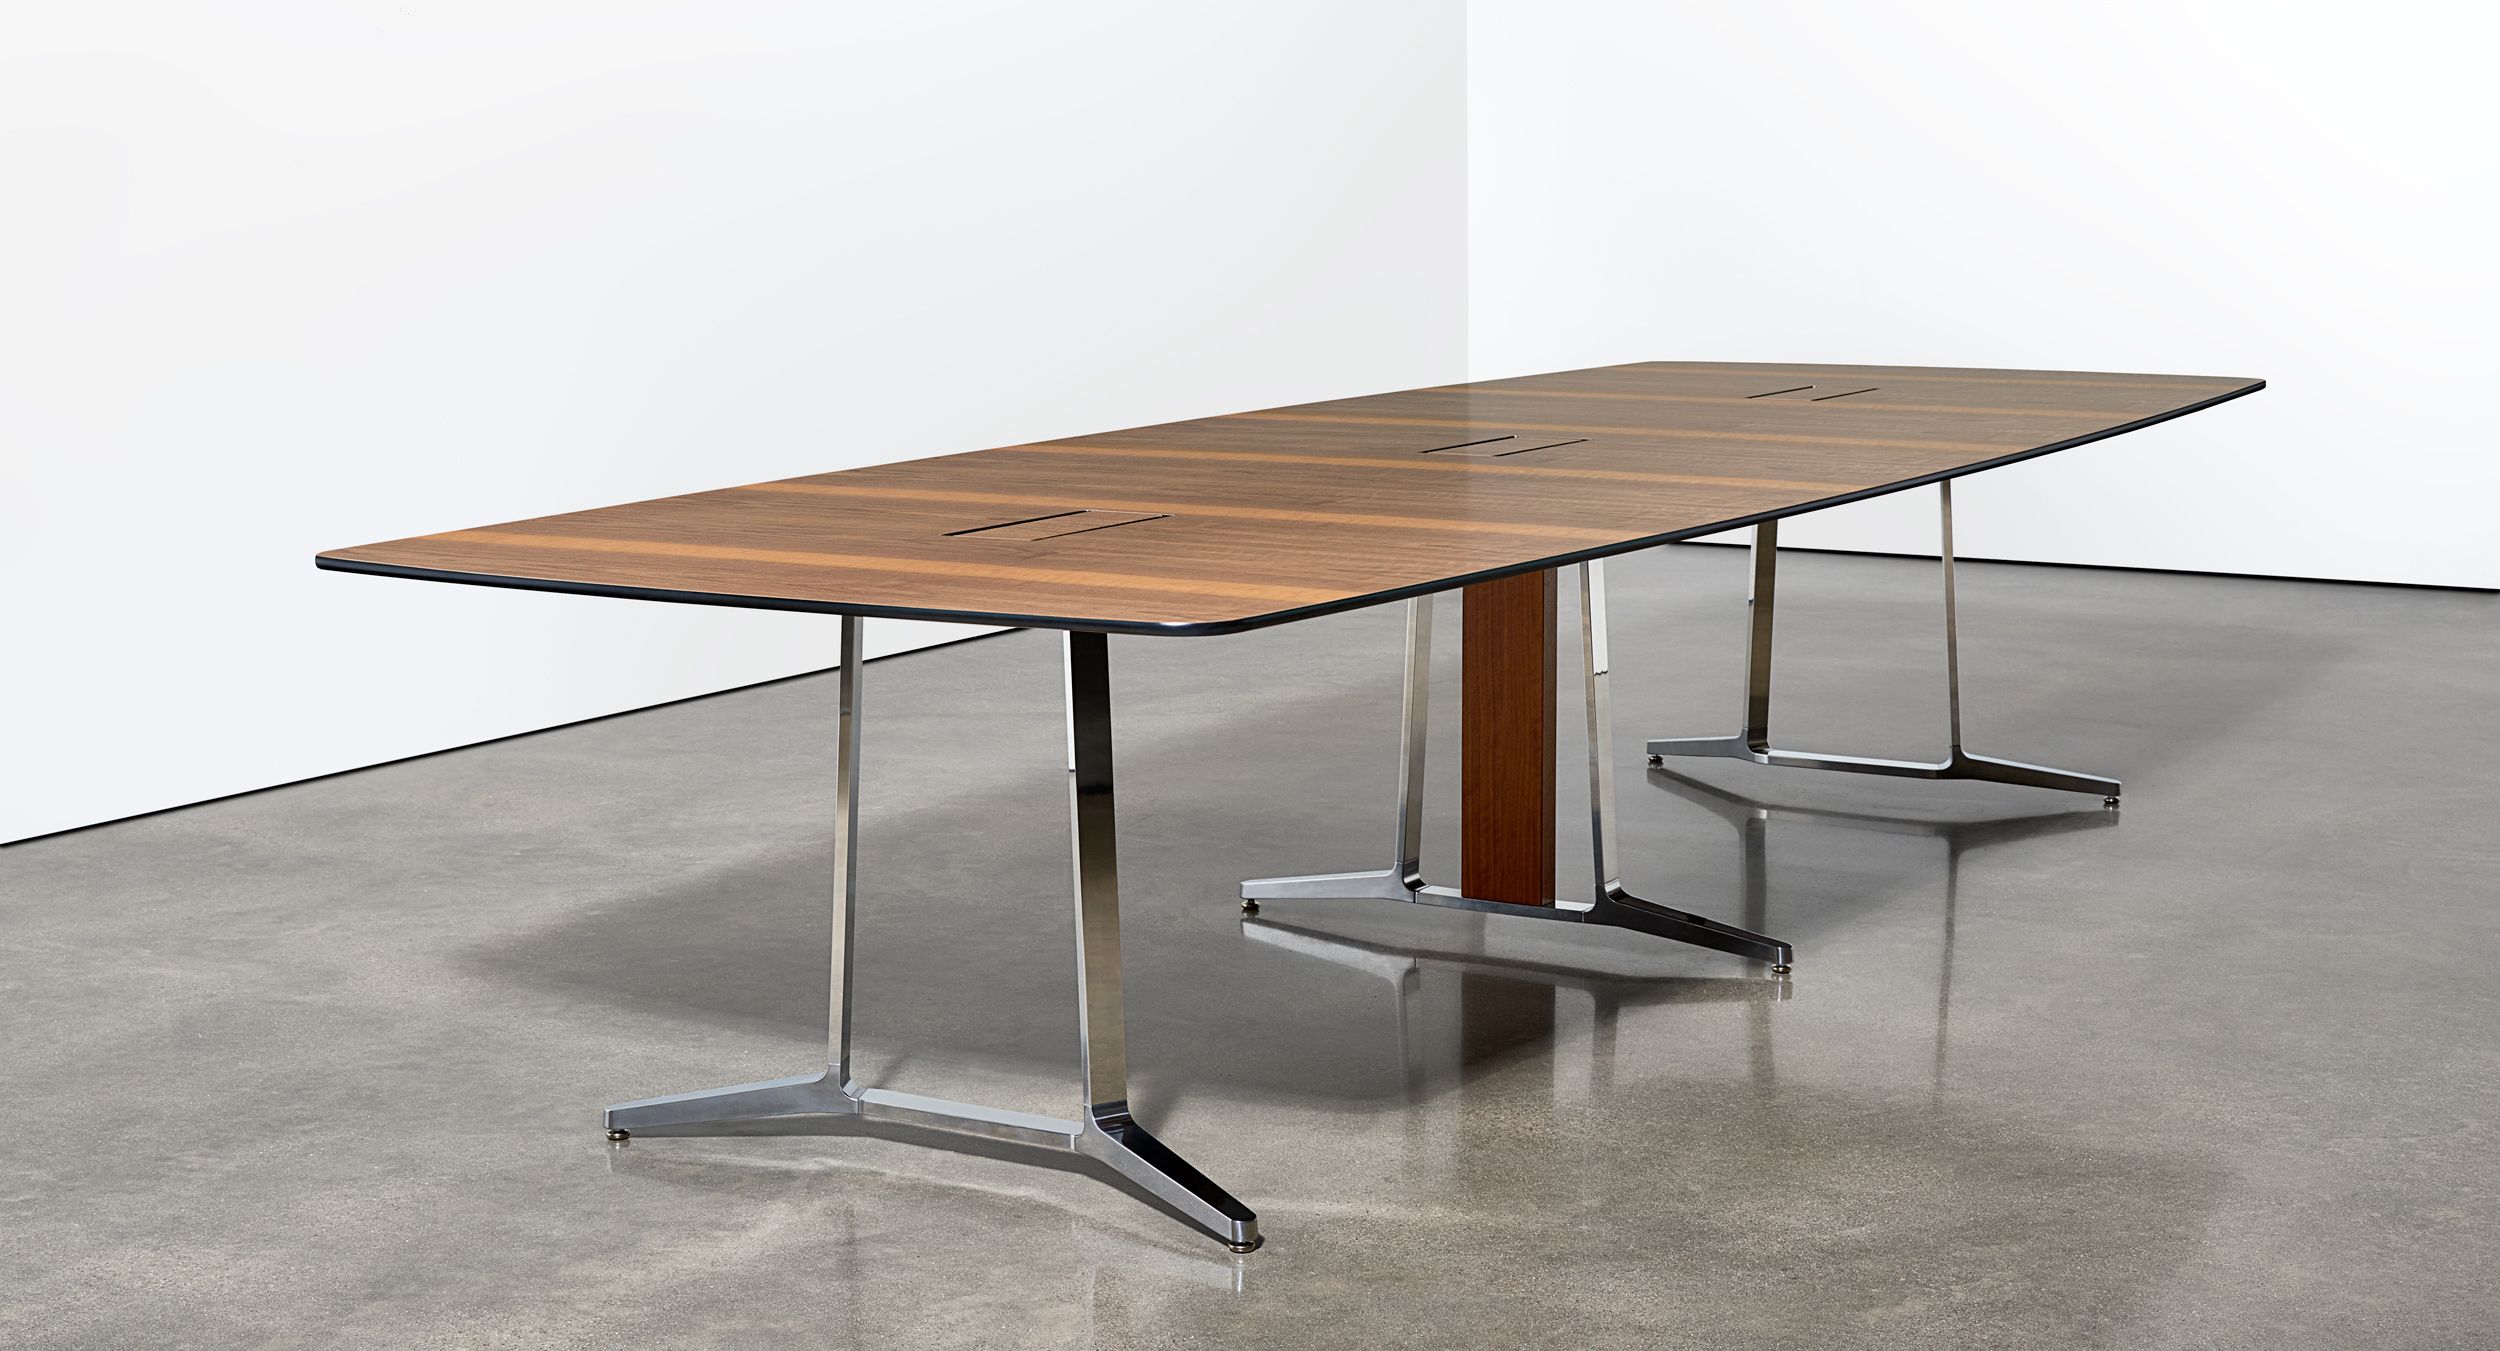 Skill conference tables are offered in a full range of sizes and finishes.